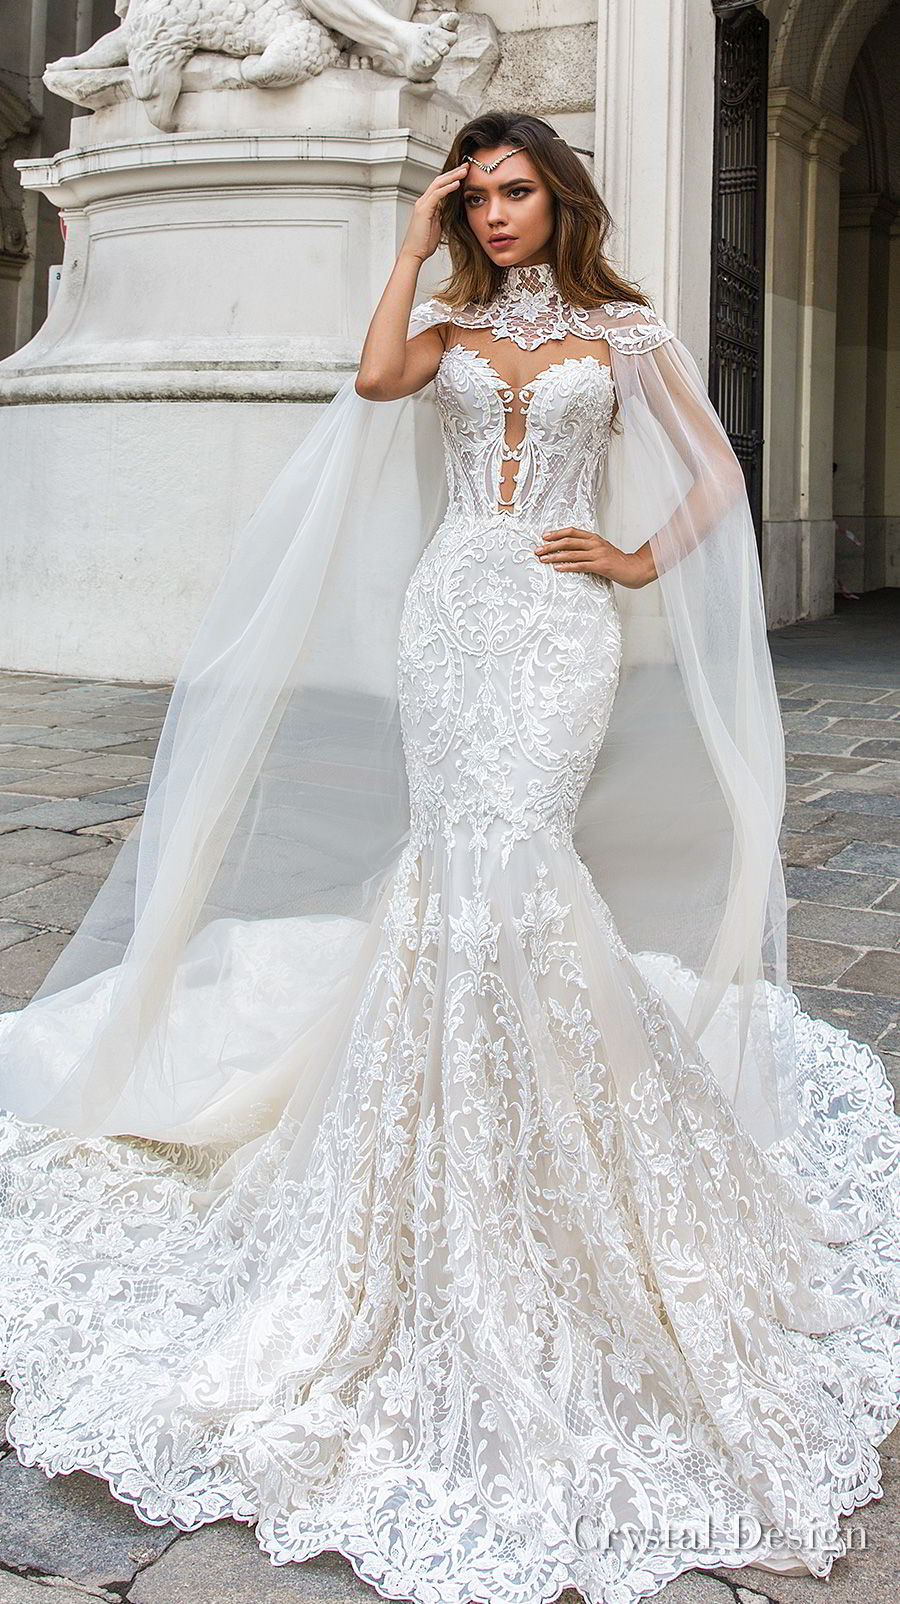 Mermaid Gown Wedding
 Crystal Design 2018 Wedding Dresses — “Royal Garden” & Haute Couture Bridal Collections